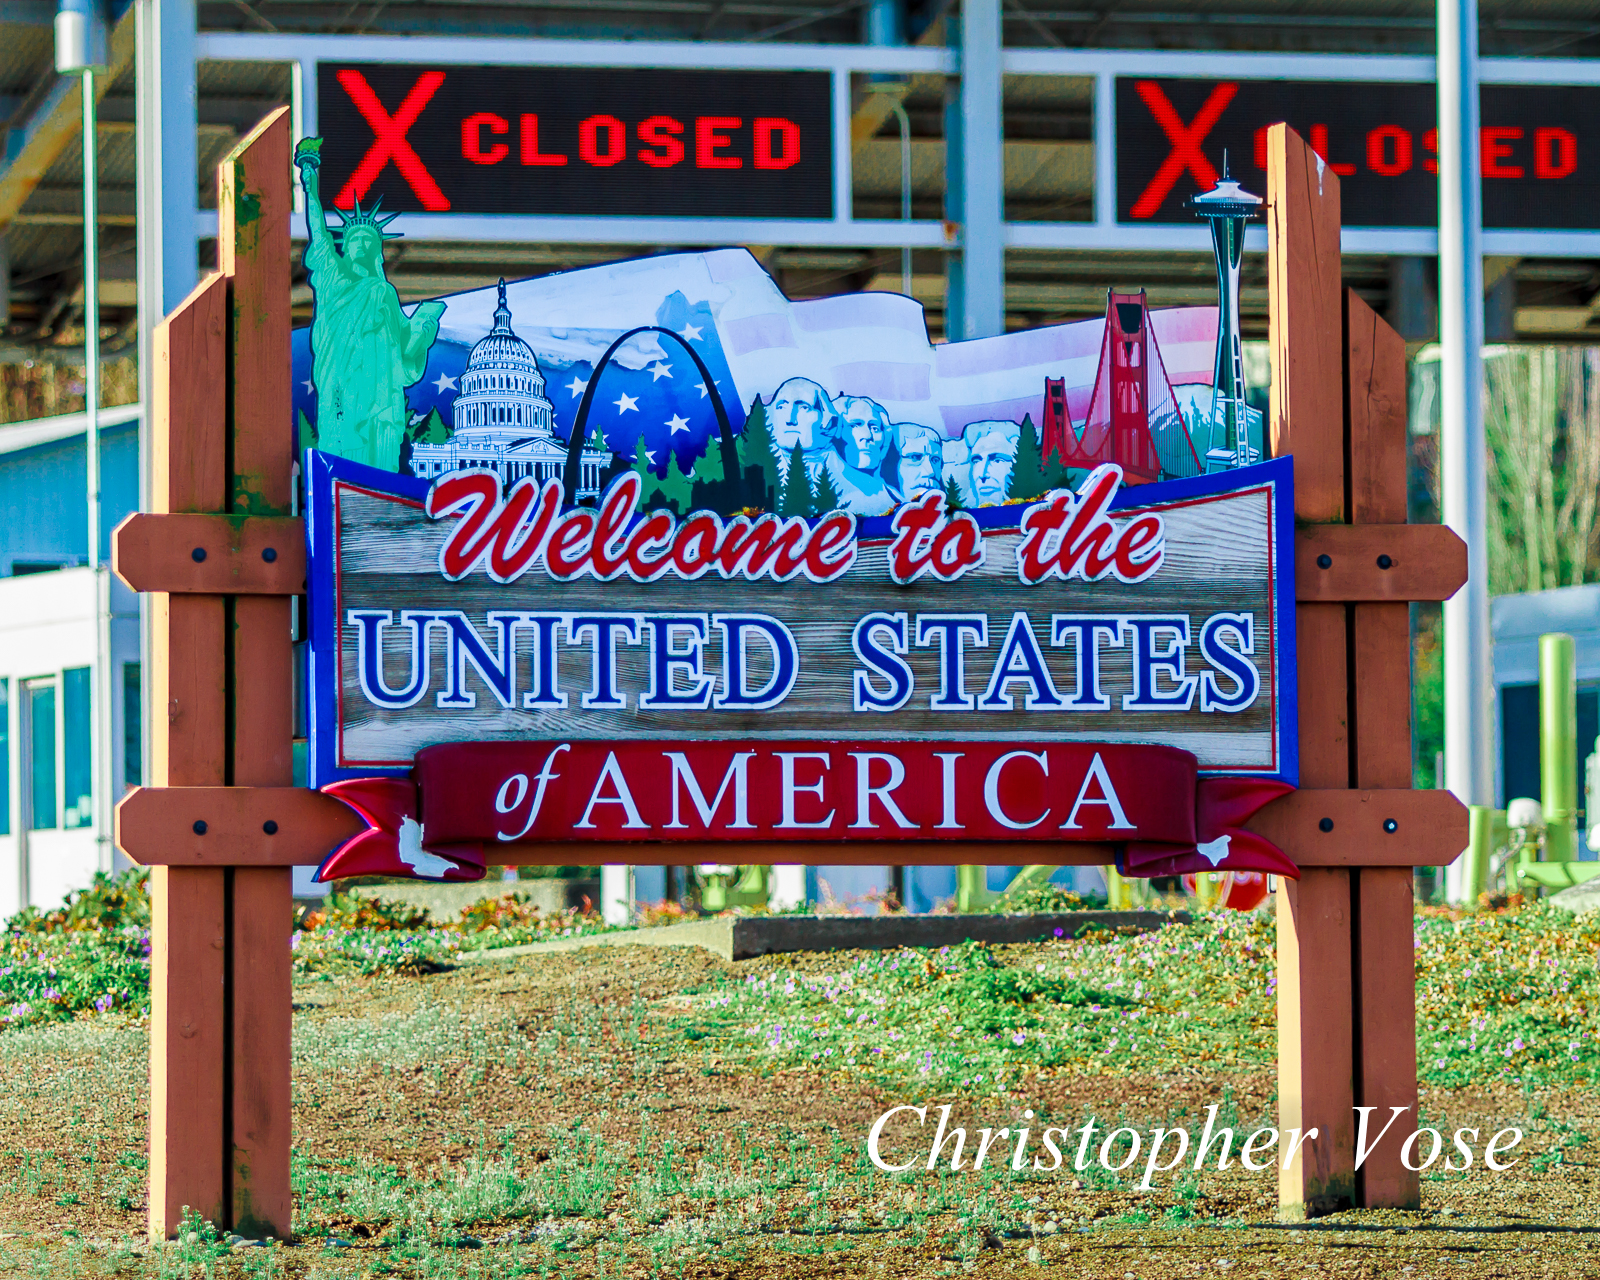 2014-09-20 Welcome to the United States of America.jpg